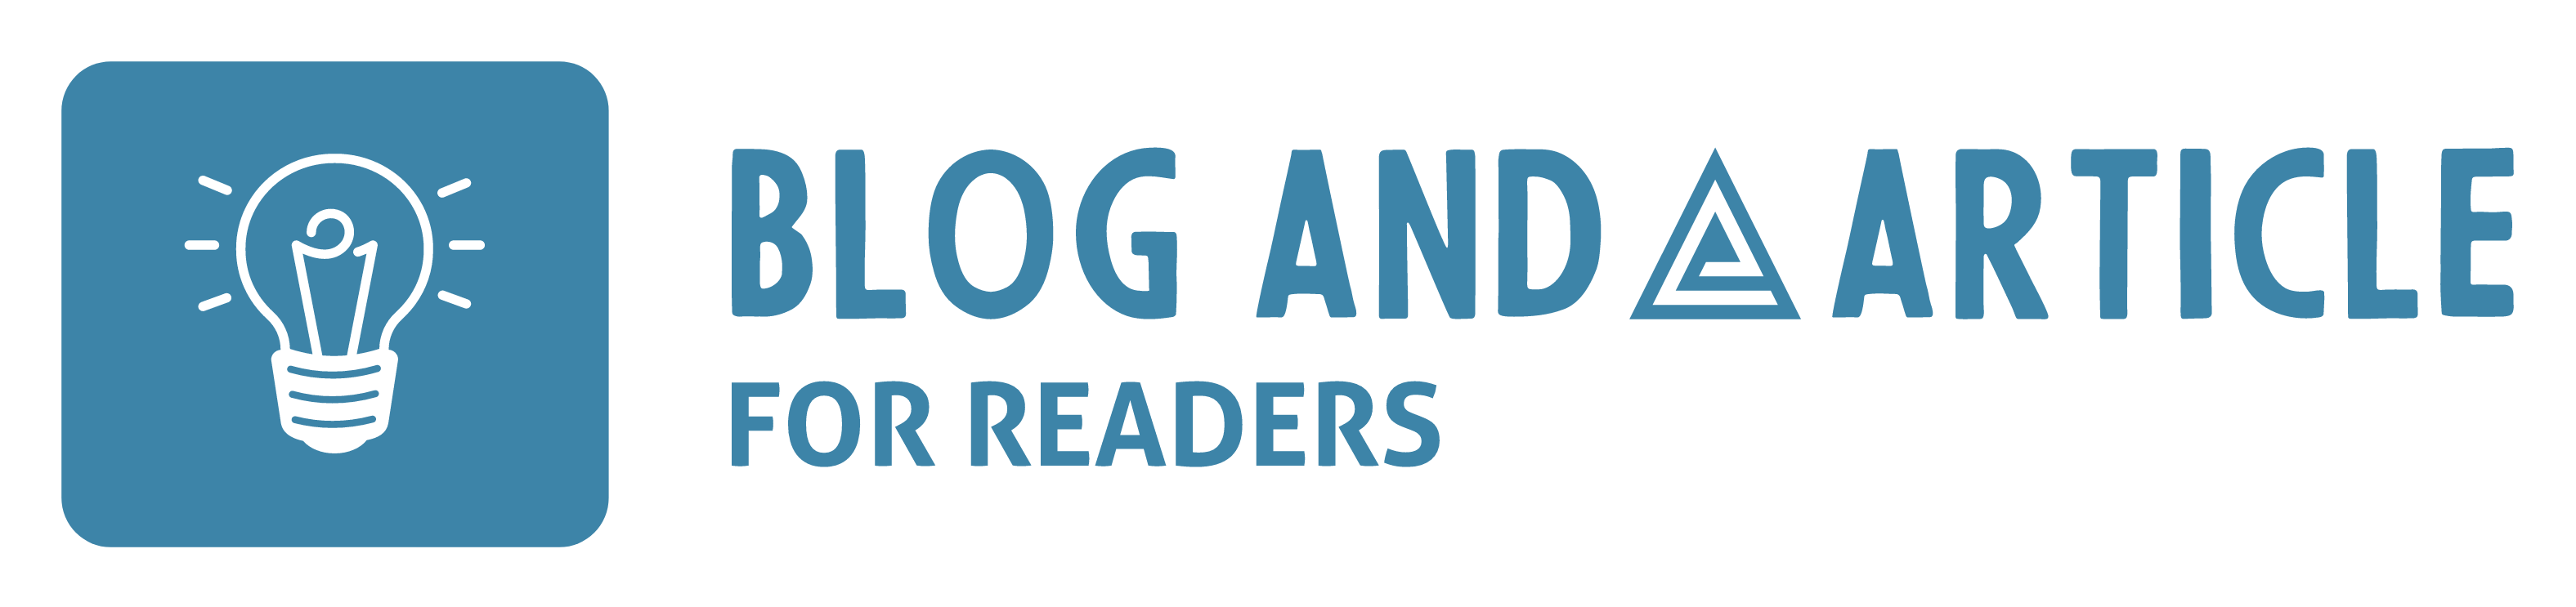 Blog and article logo